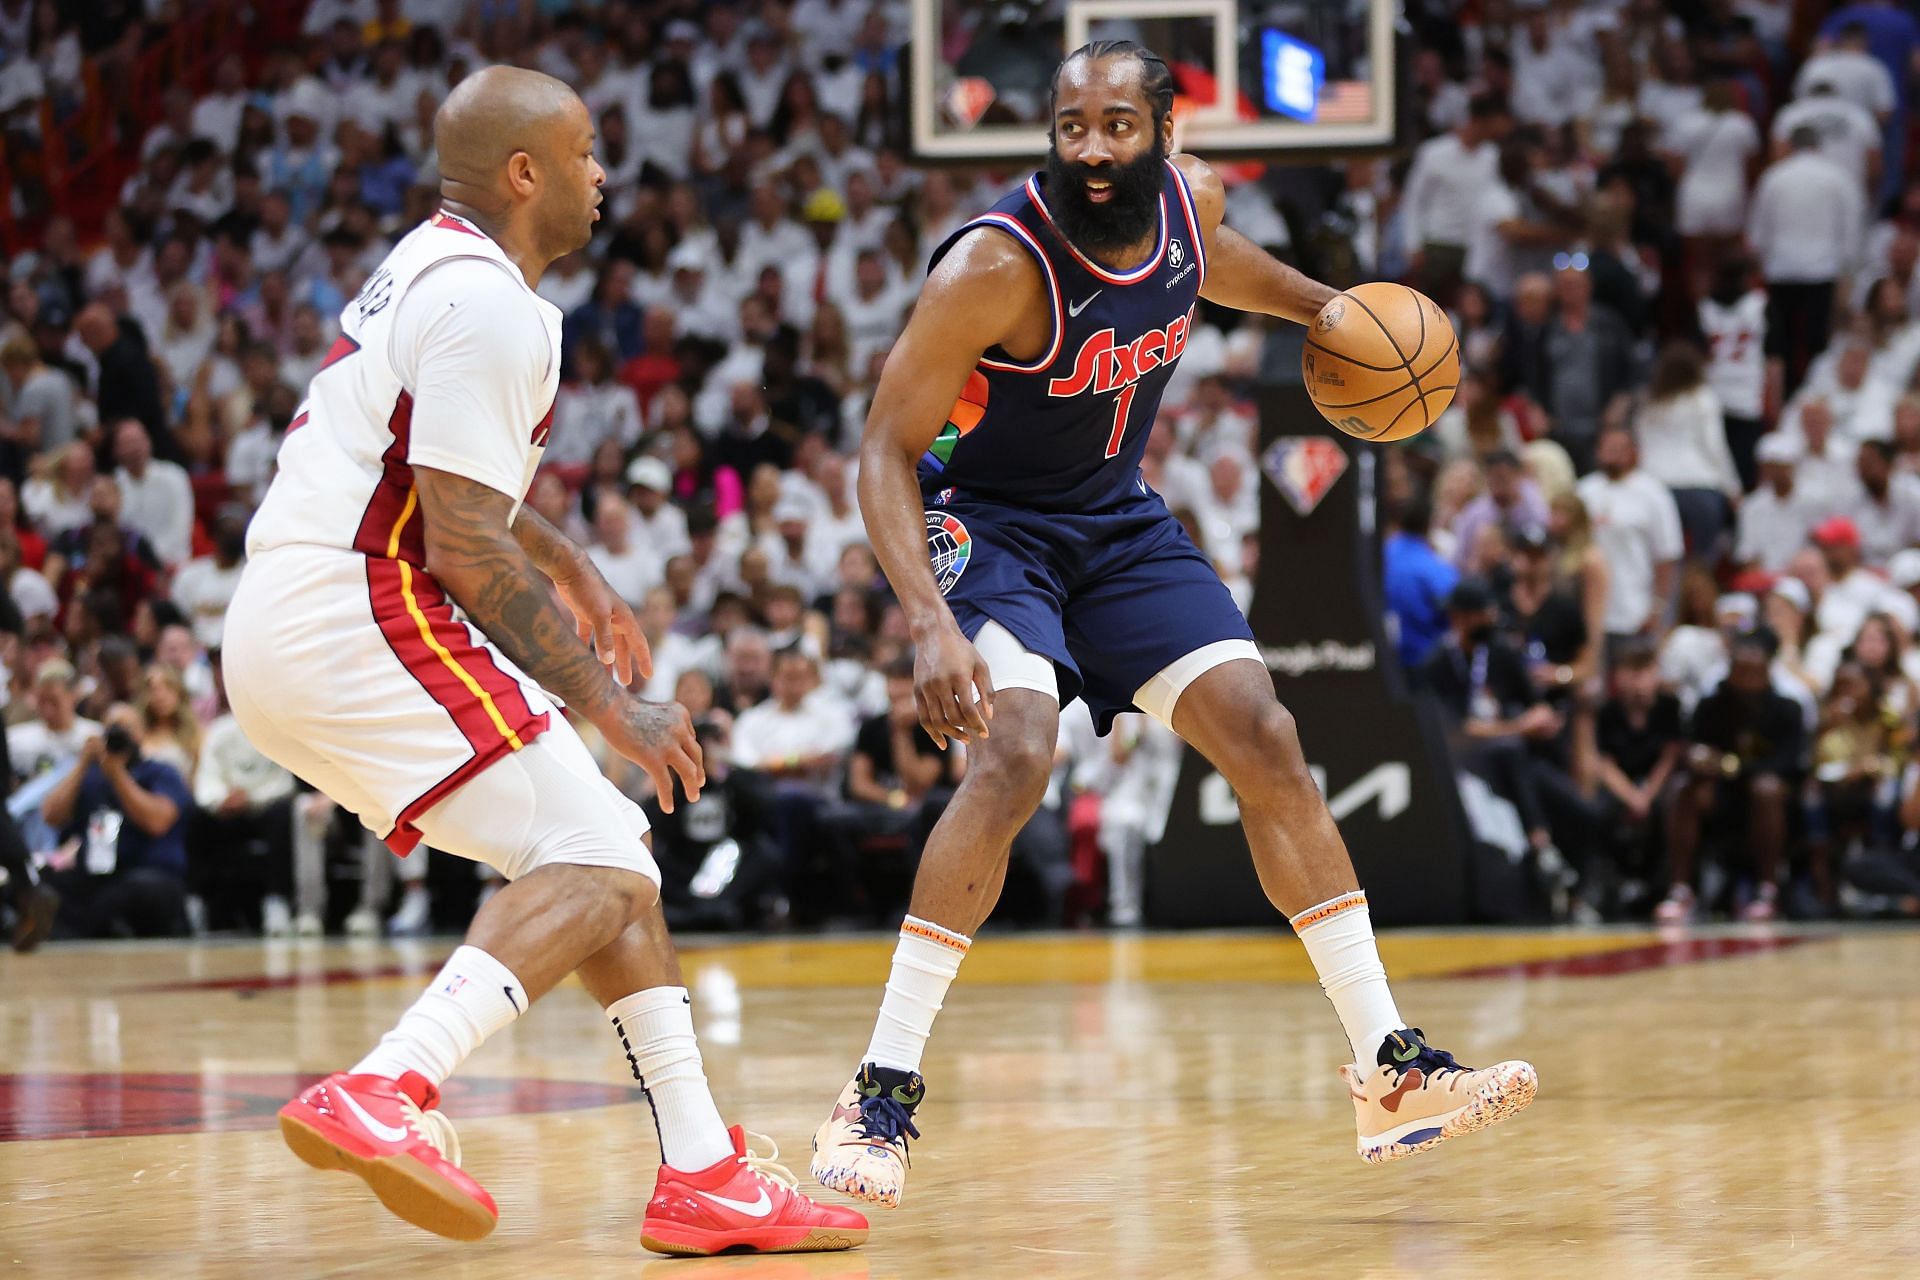 Philadelphia 76ers guard James Harden with the ball